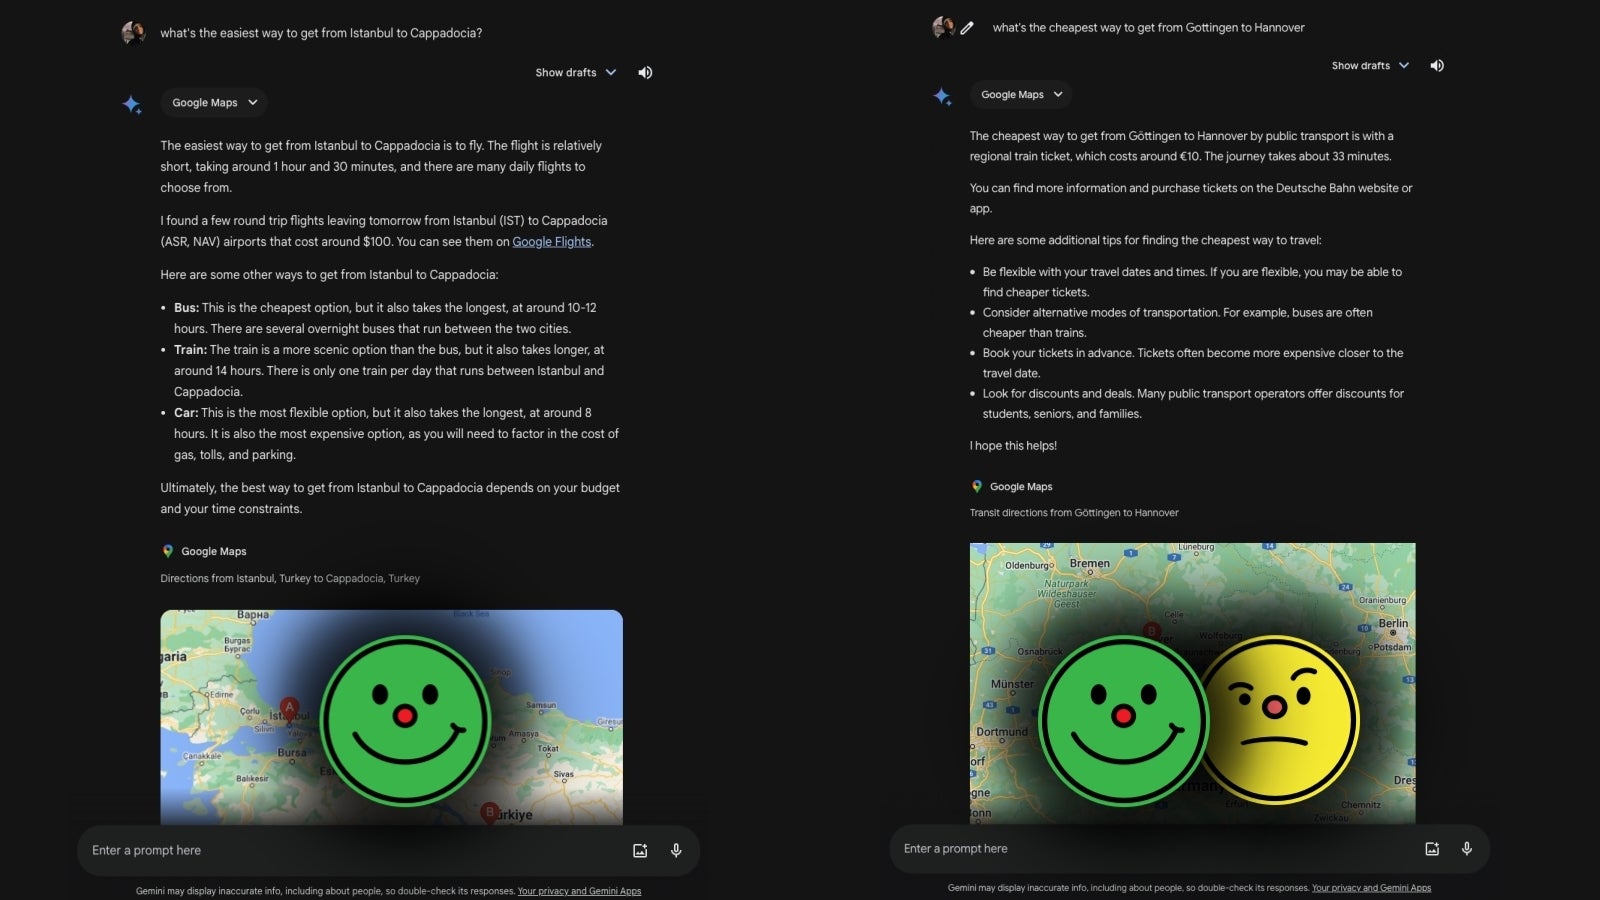 Note that for a better experience, try reading the longer version of Gemini’s responses on a larger screen. Or better - give Gemini through your browser right now! - Canceled? Google Gemini AI tells me &quot;offensive&quot; jokes about &quot;poor people&quot; - but that's only human